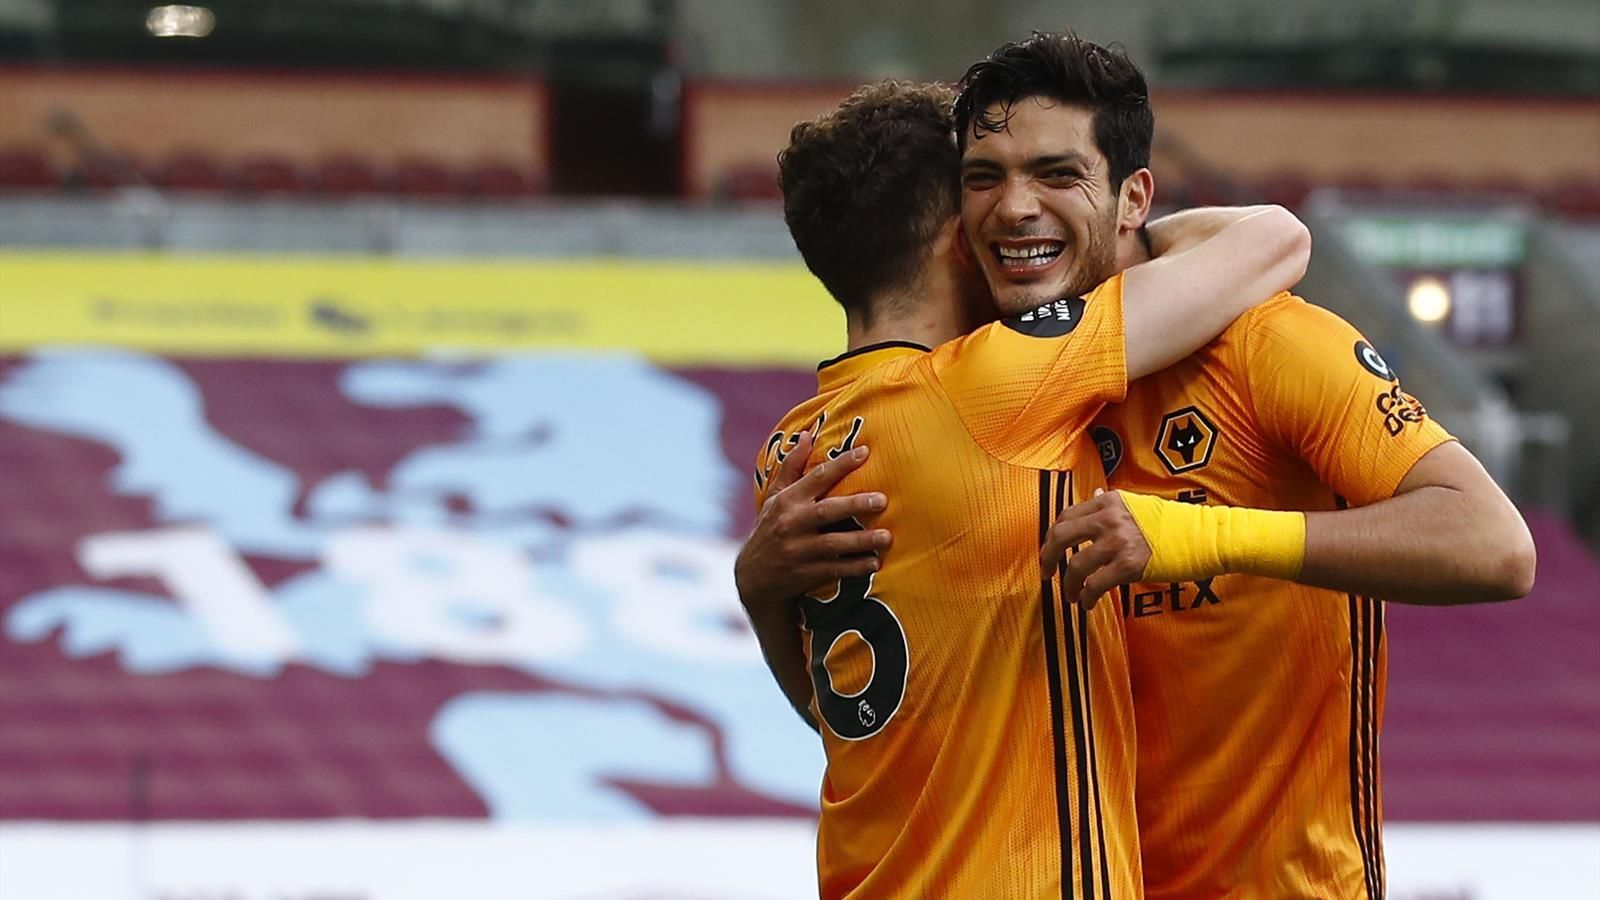 Burnley Saved from Defeat against Wolves with a Last-minute Penalty Kick from Wood